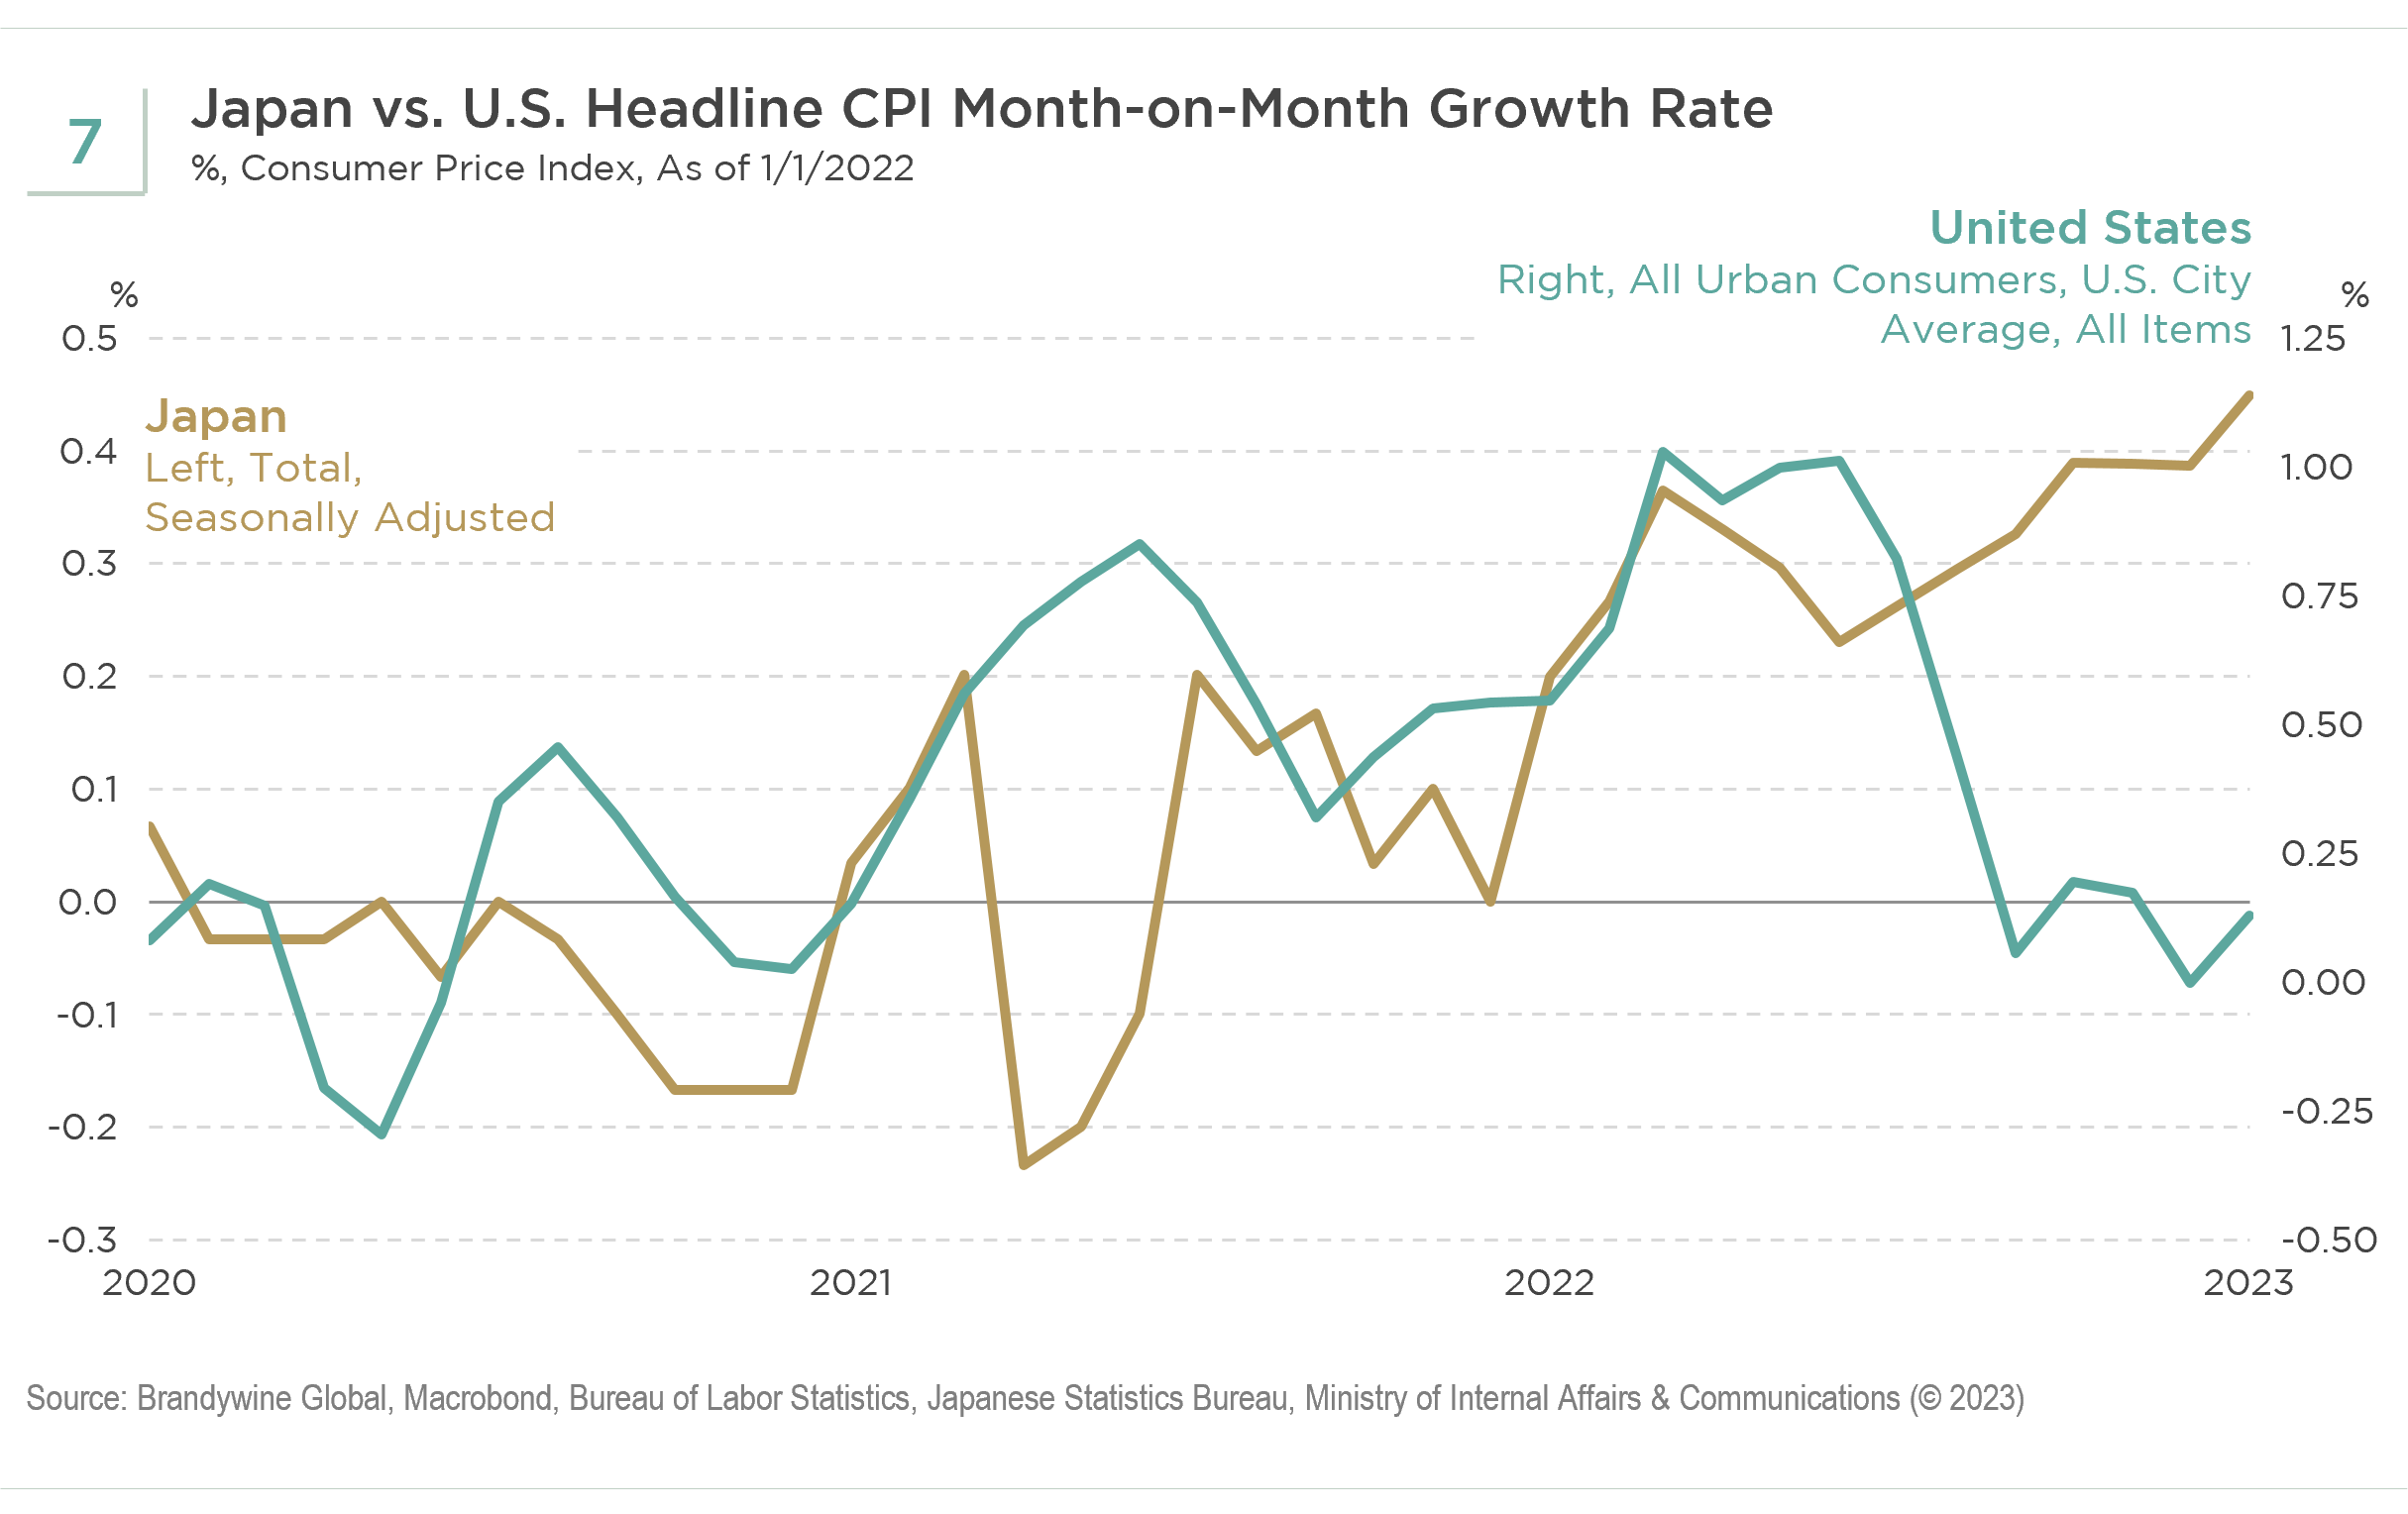 Japan vs U.S. headline CPI month-on-month growth rate